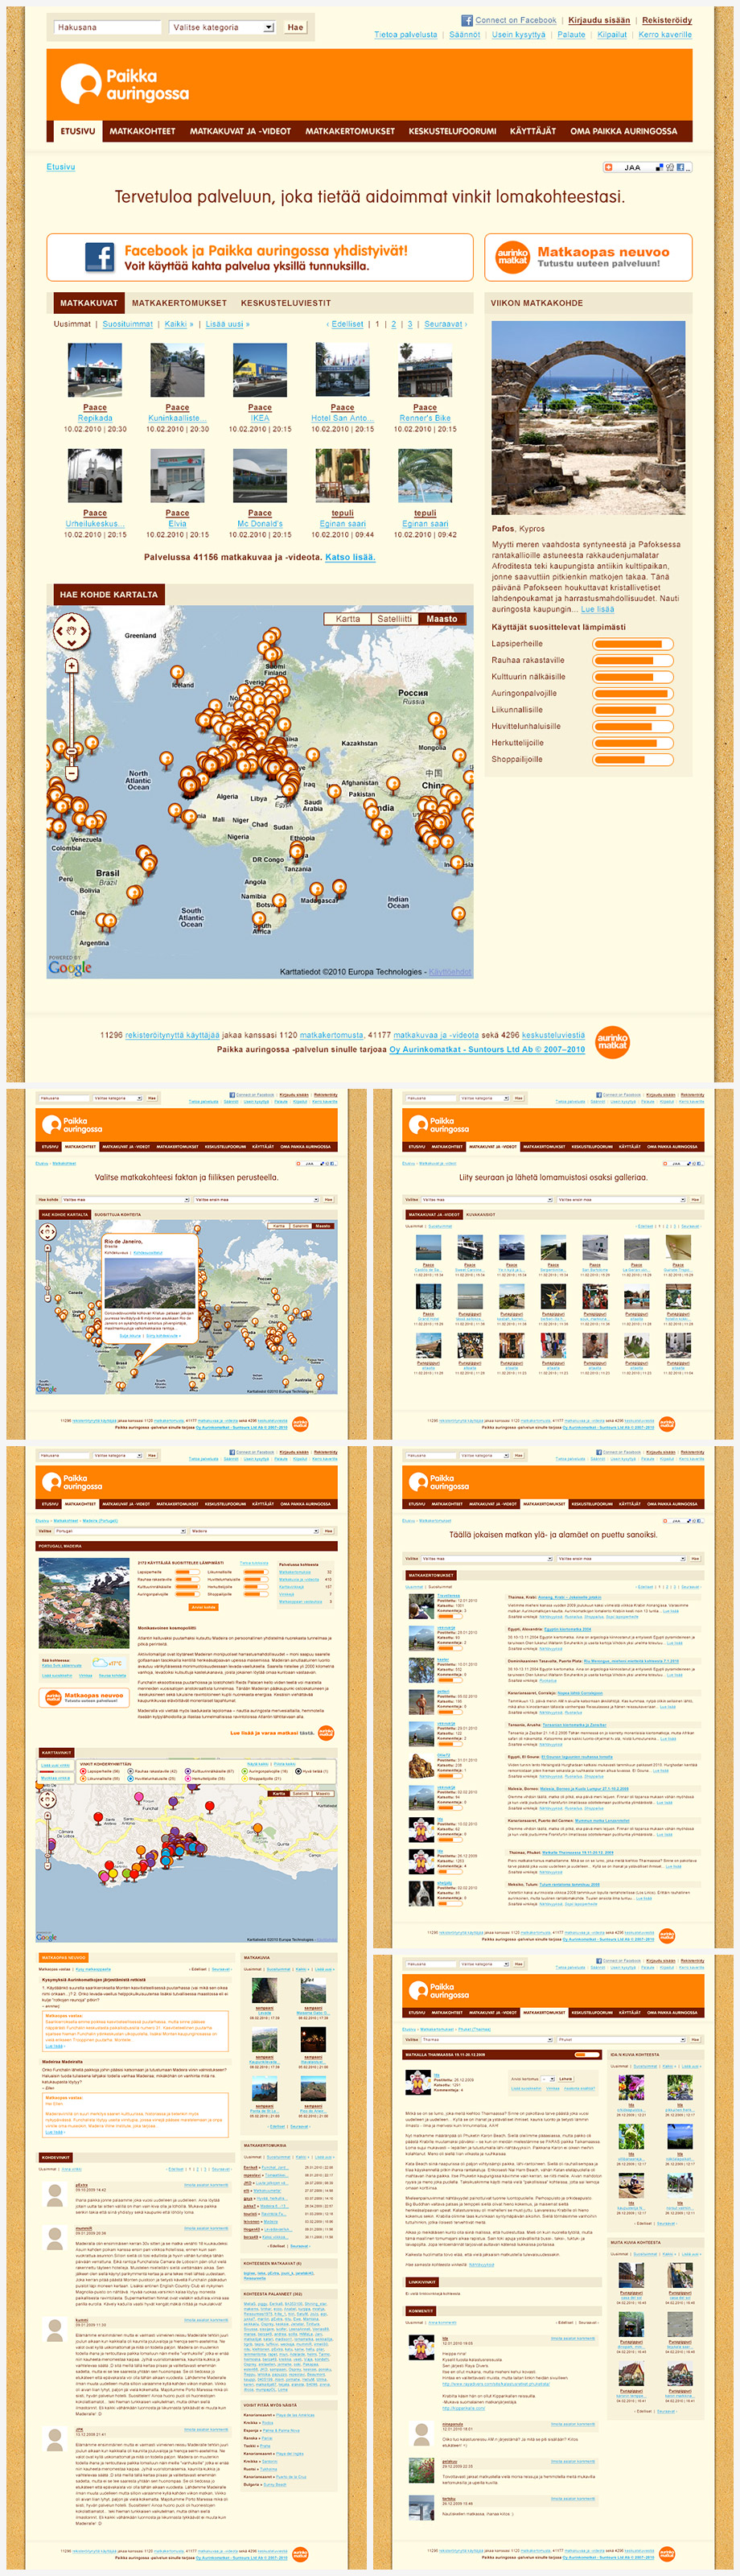 Examples of online travel community's features